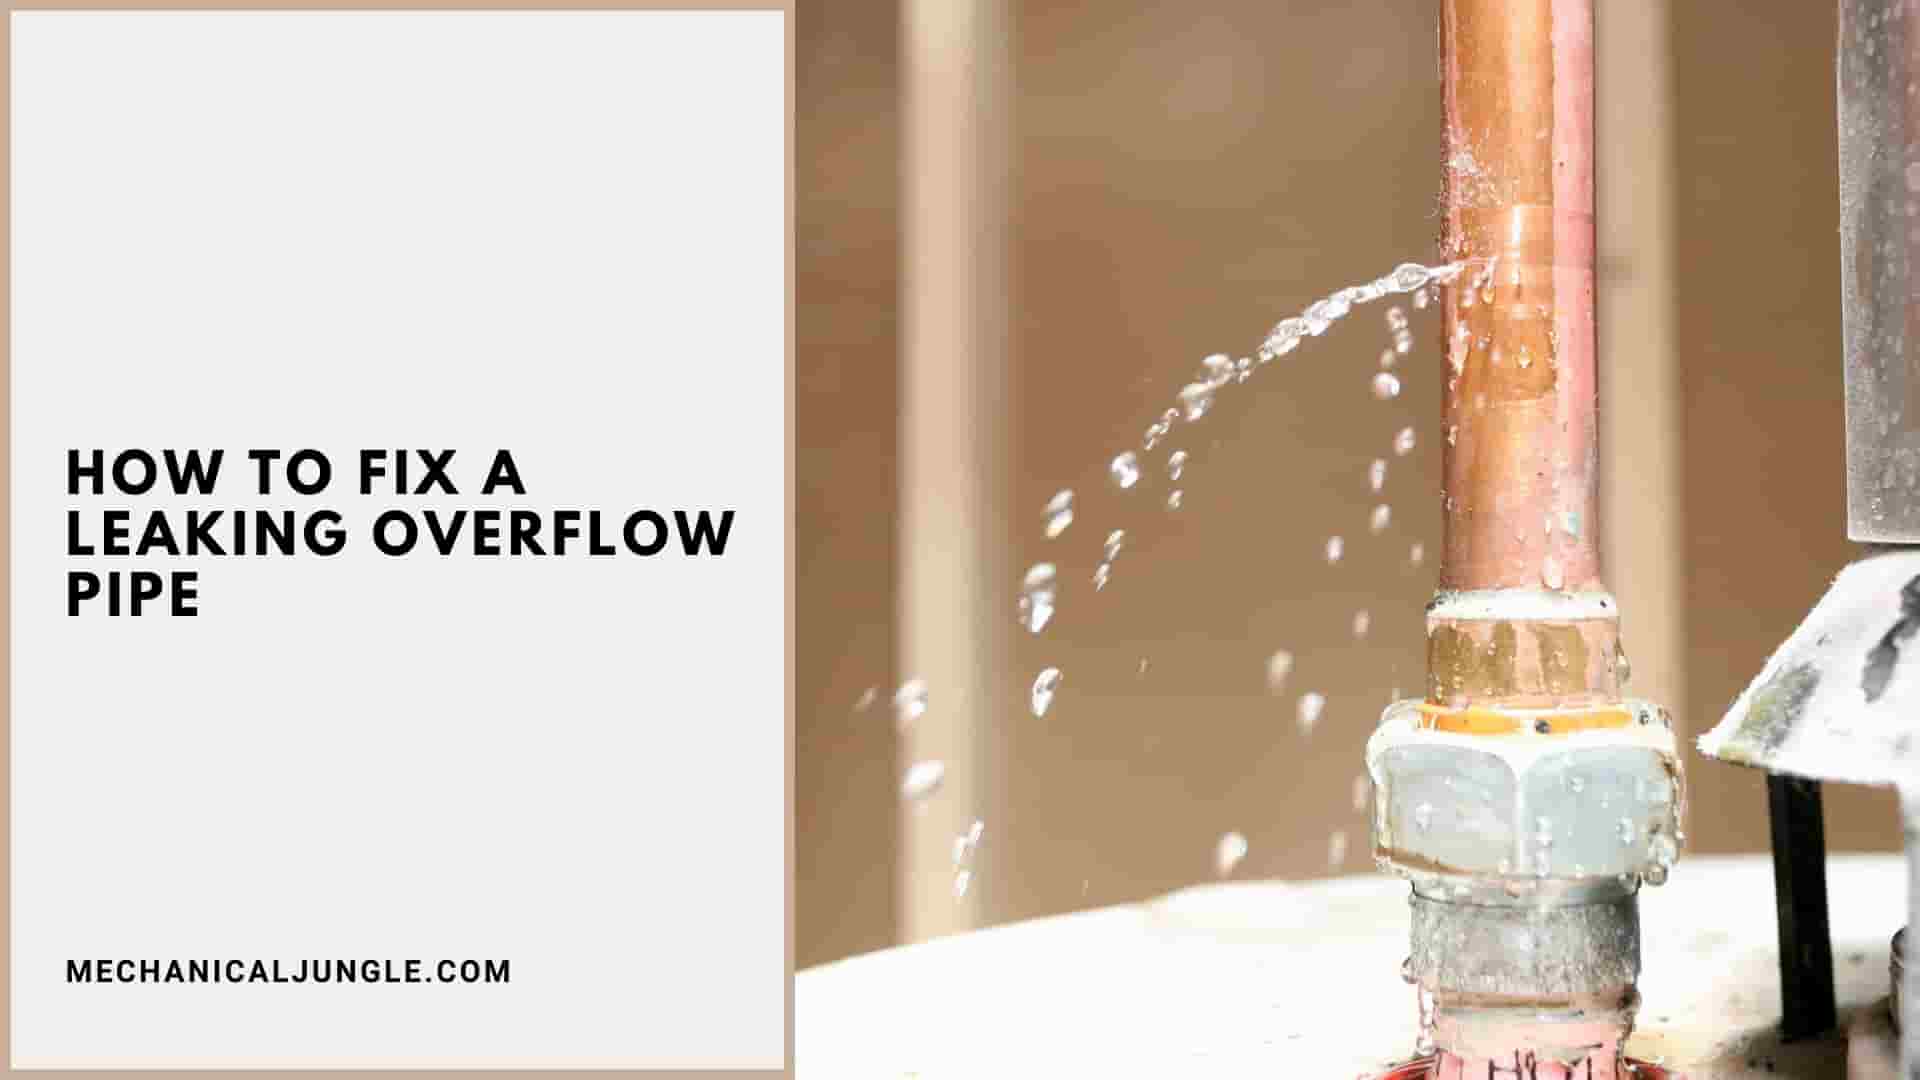 How to Fix a Leaking Overflow Pipe